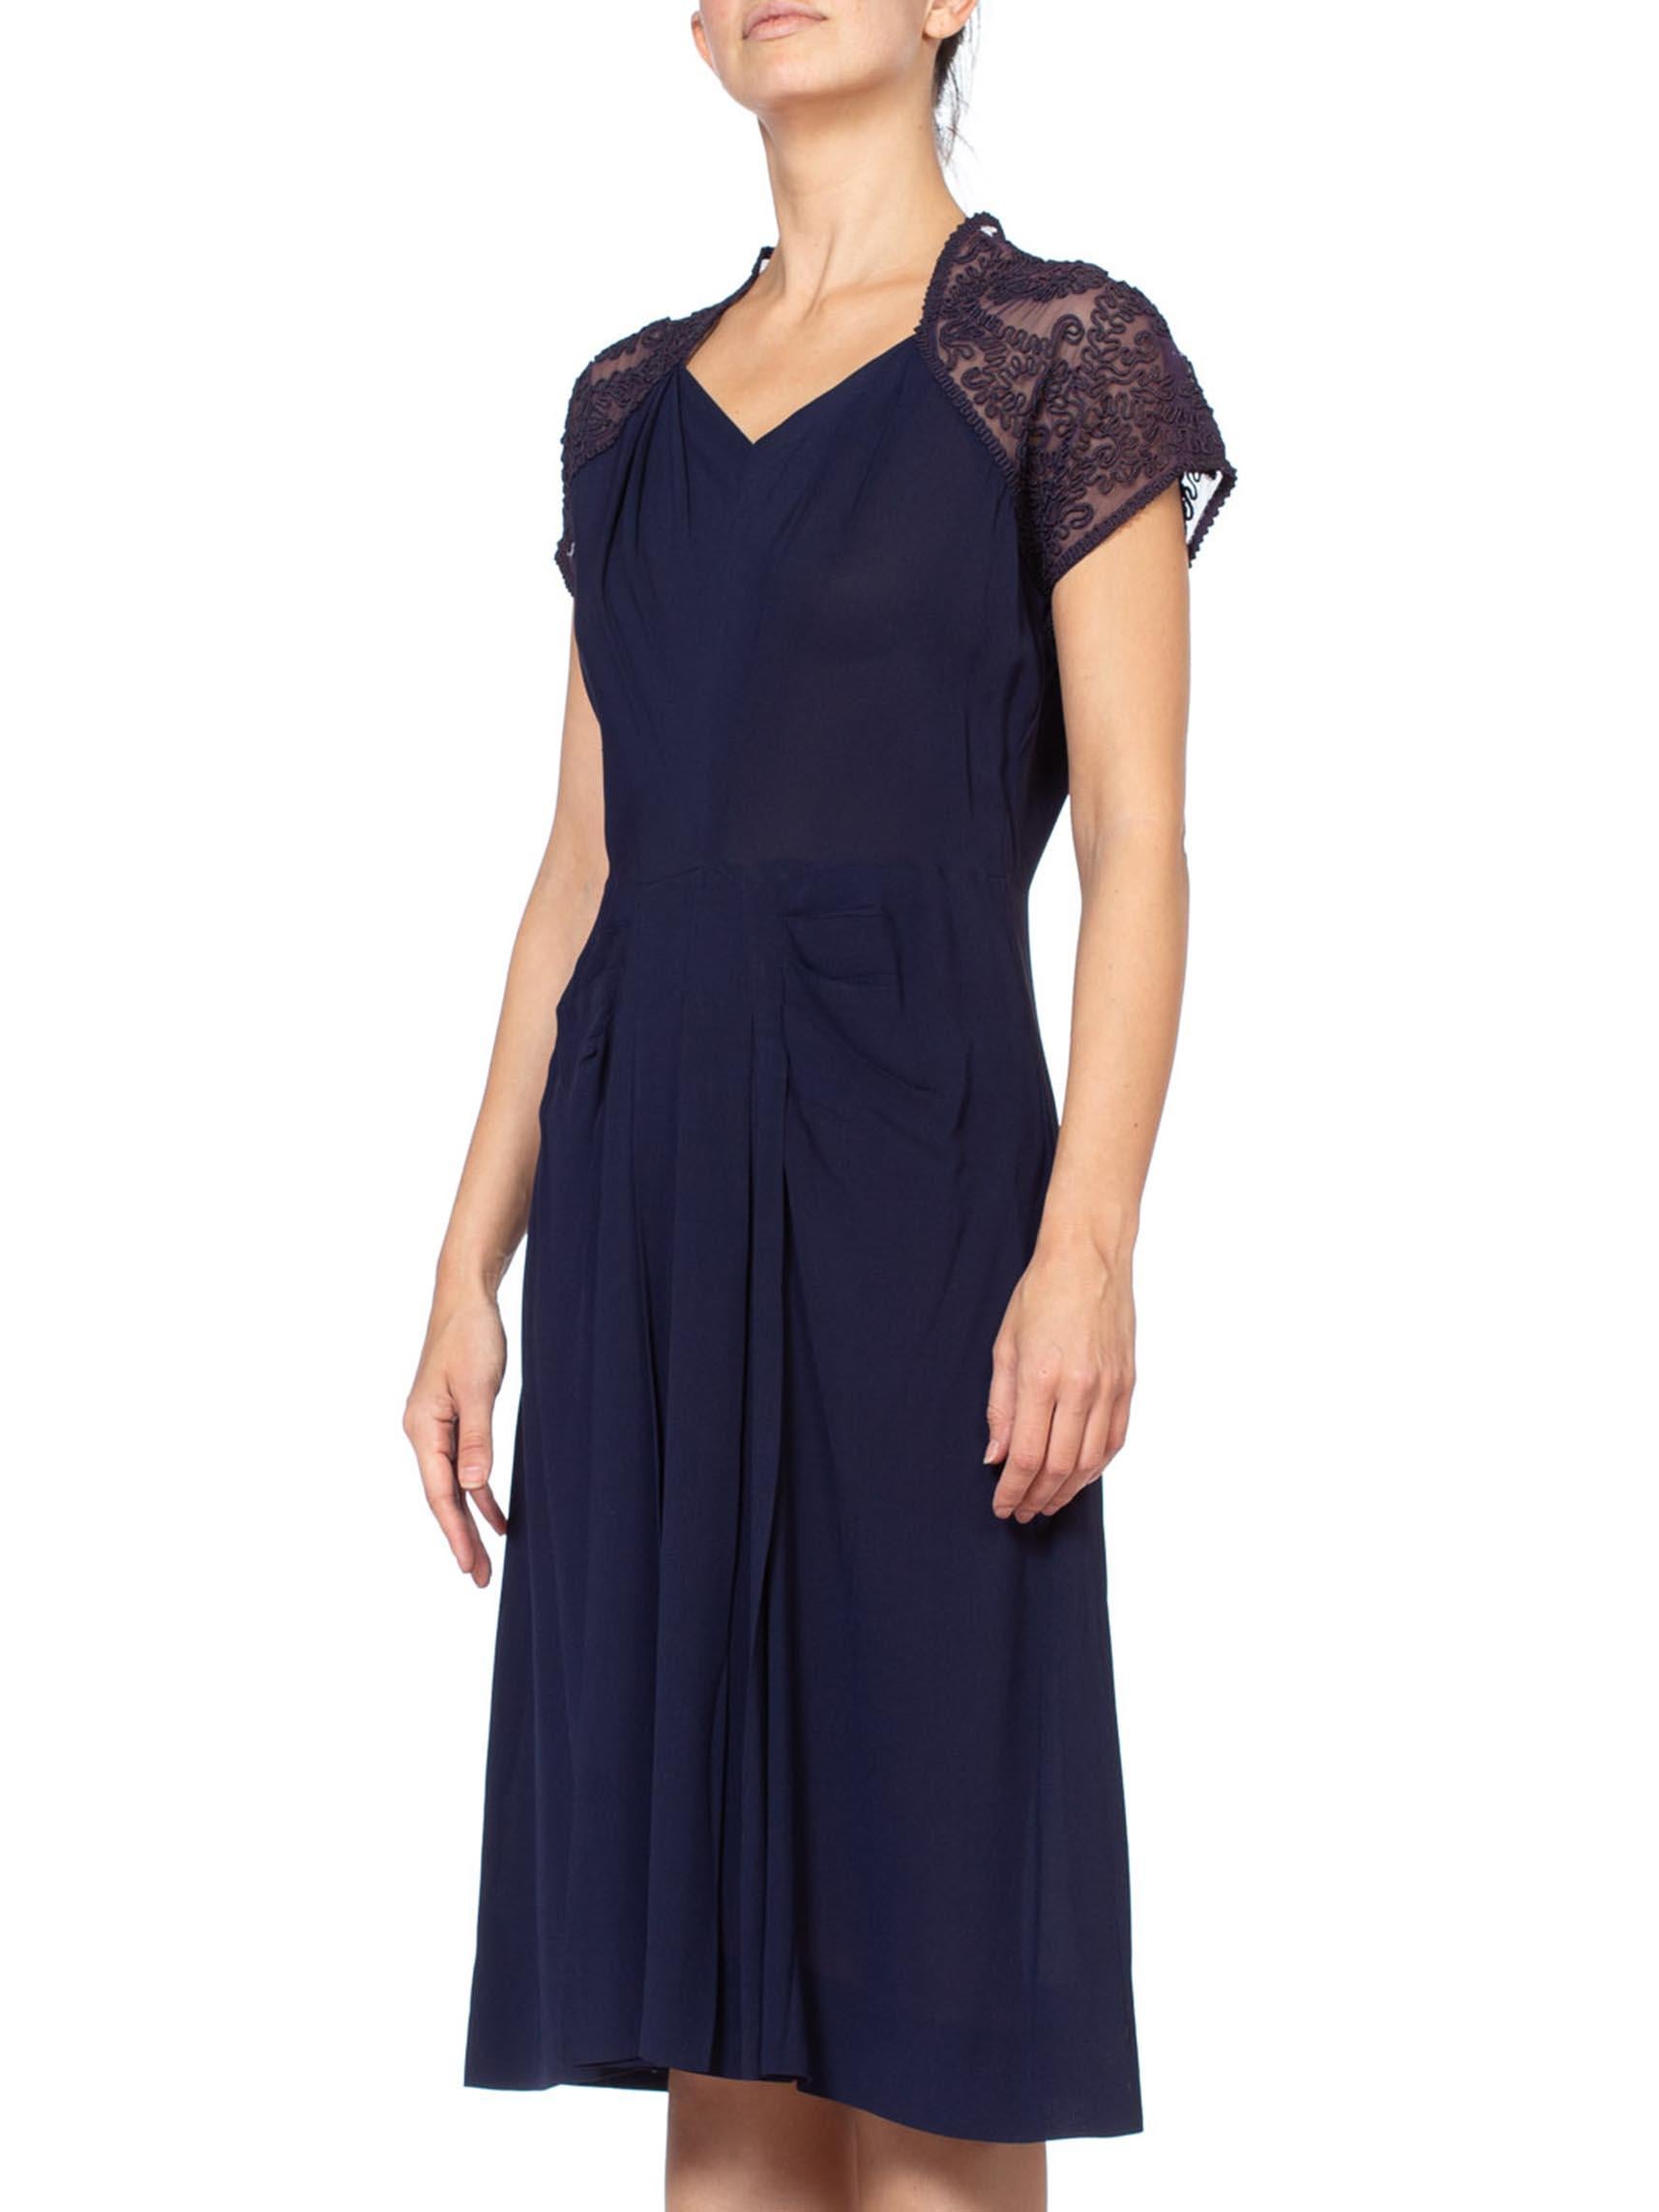 1940'S Navy Blue Rayon Crepe Dress With Embroidered Sheer Back For Sale 3